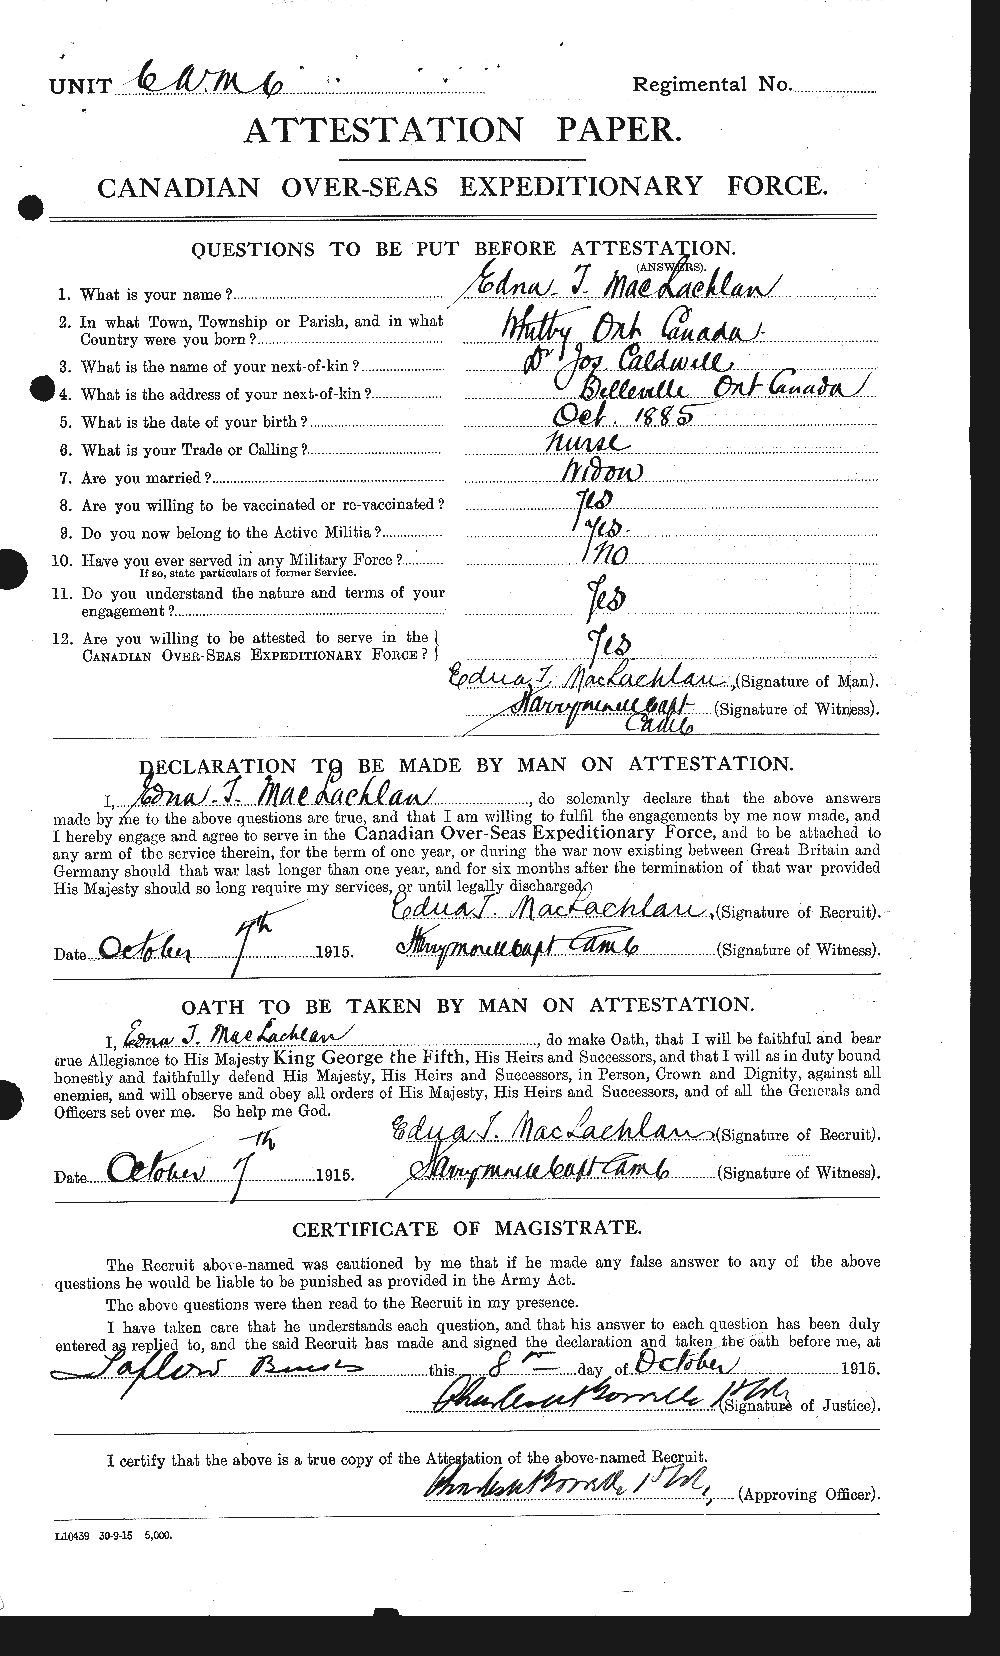 Personnel Records of the First World War - CEF 533853a